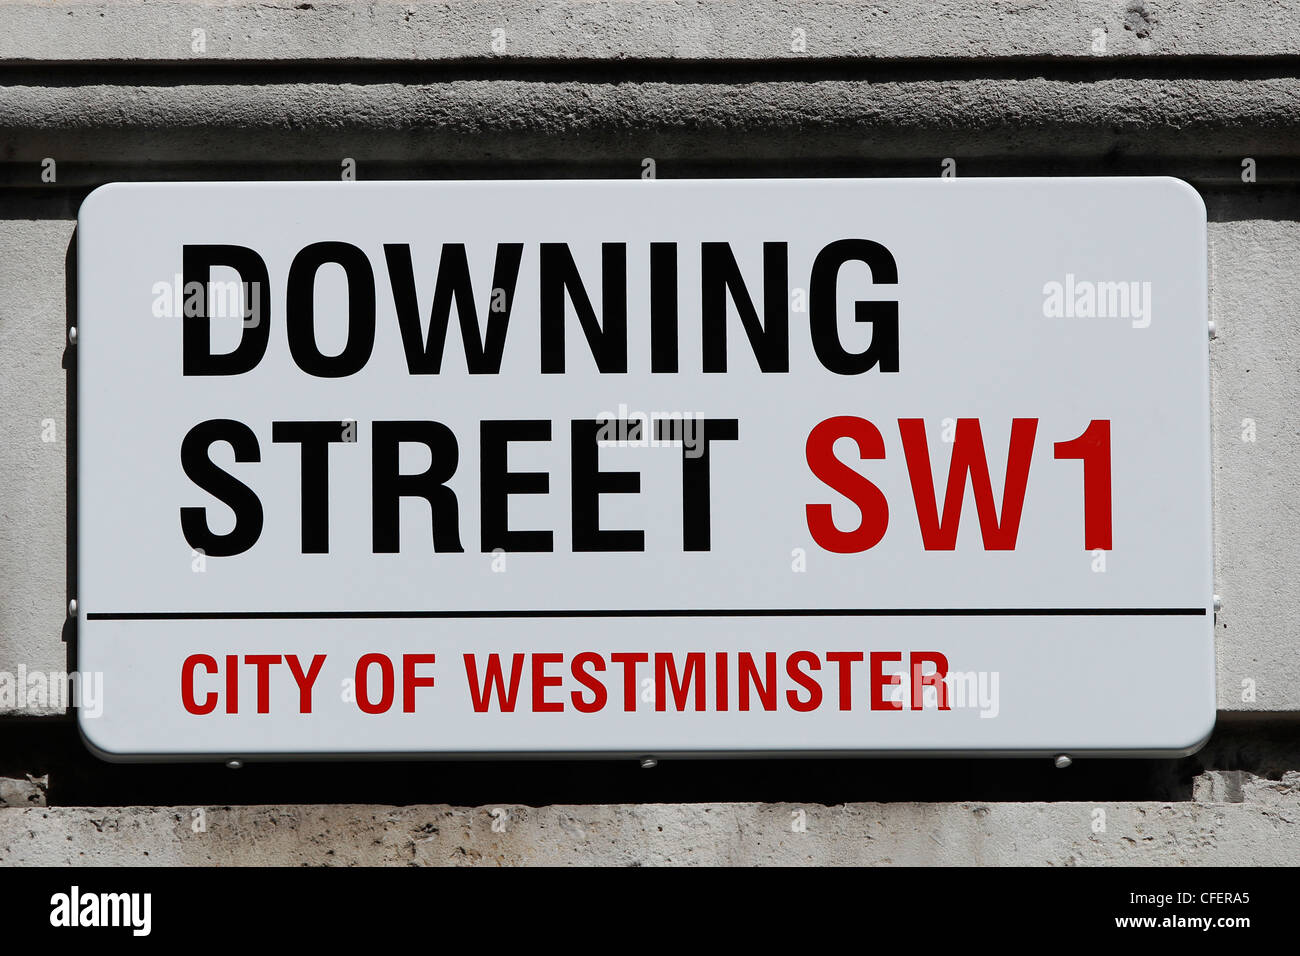 Cartello stradale di Downing Street in CAP SW1, City of Westminster, Londra Foto Stock